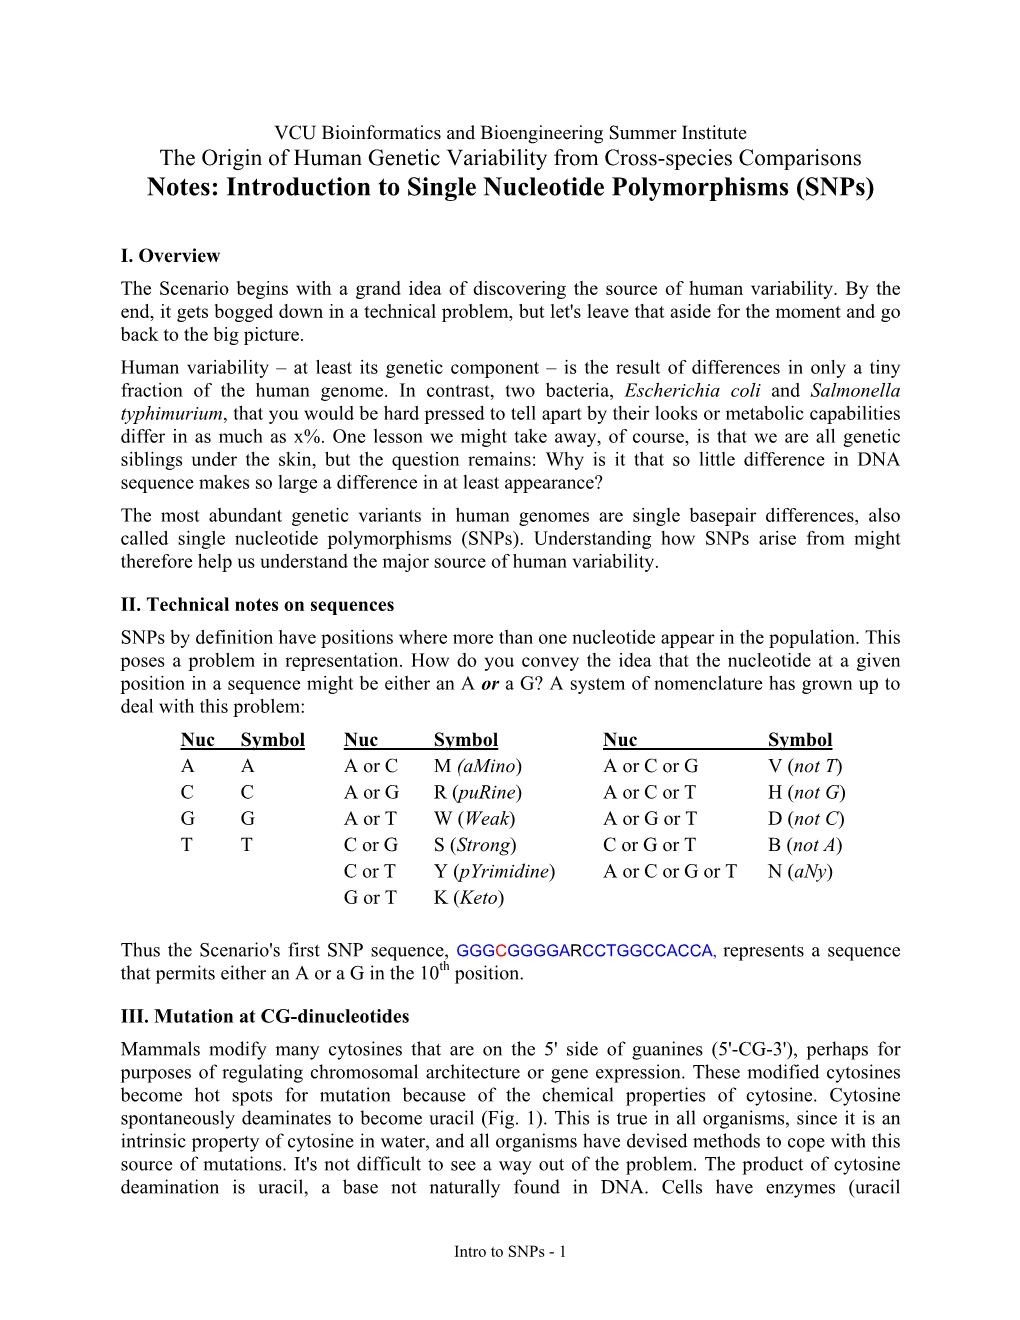 Notes: Introduction to Single Nucleotide Polymorphisms (Snps)